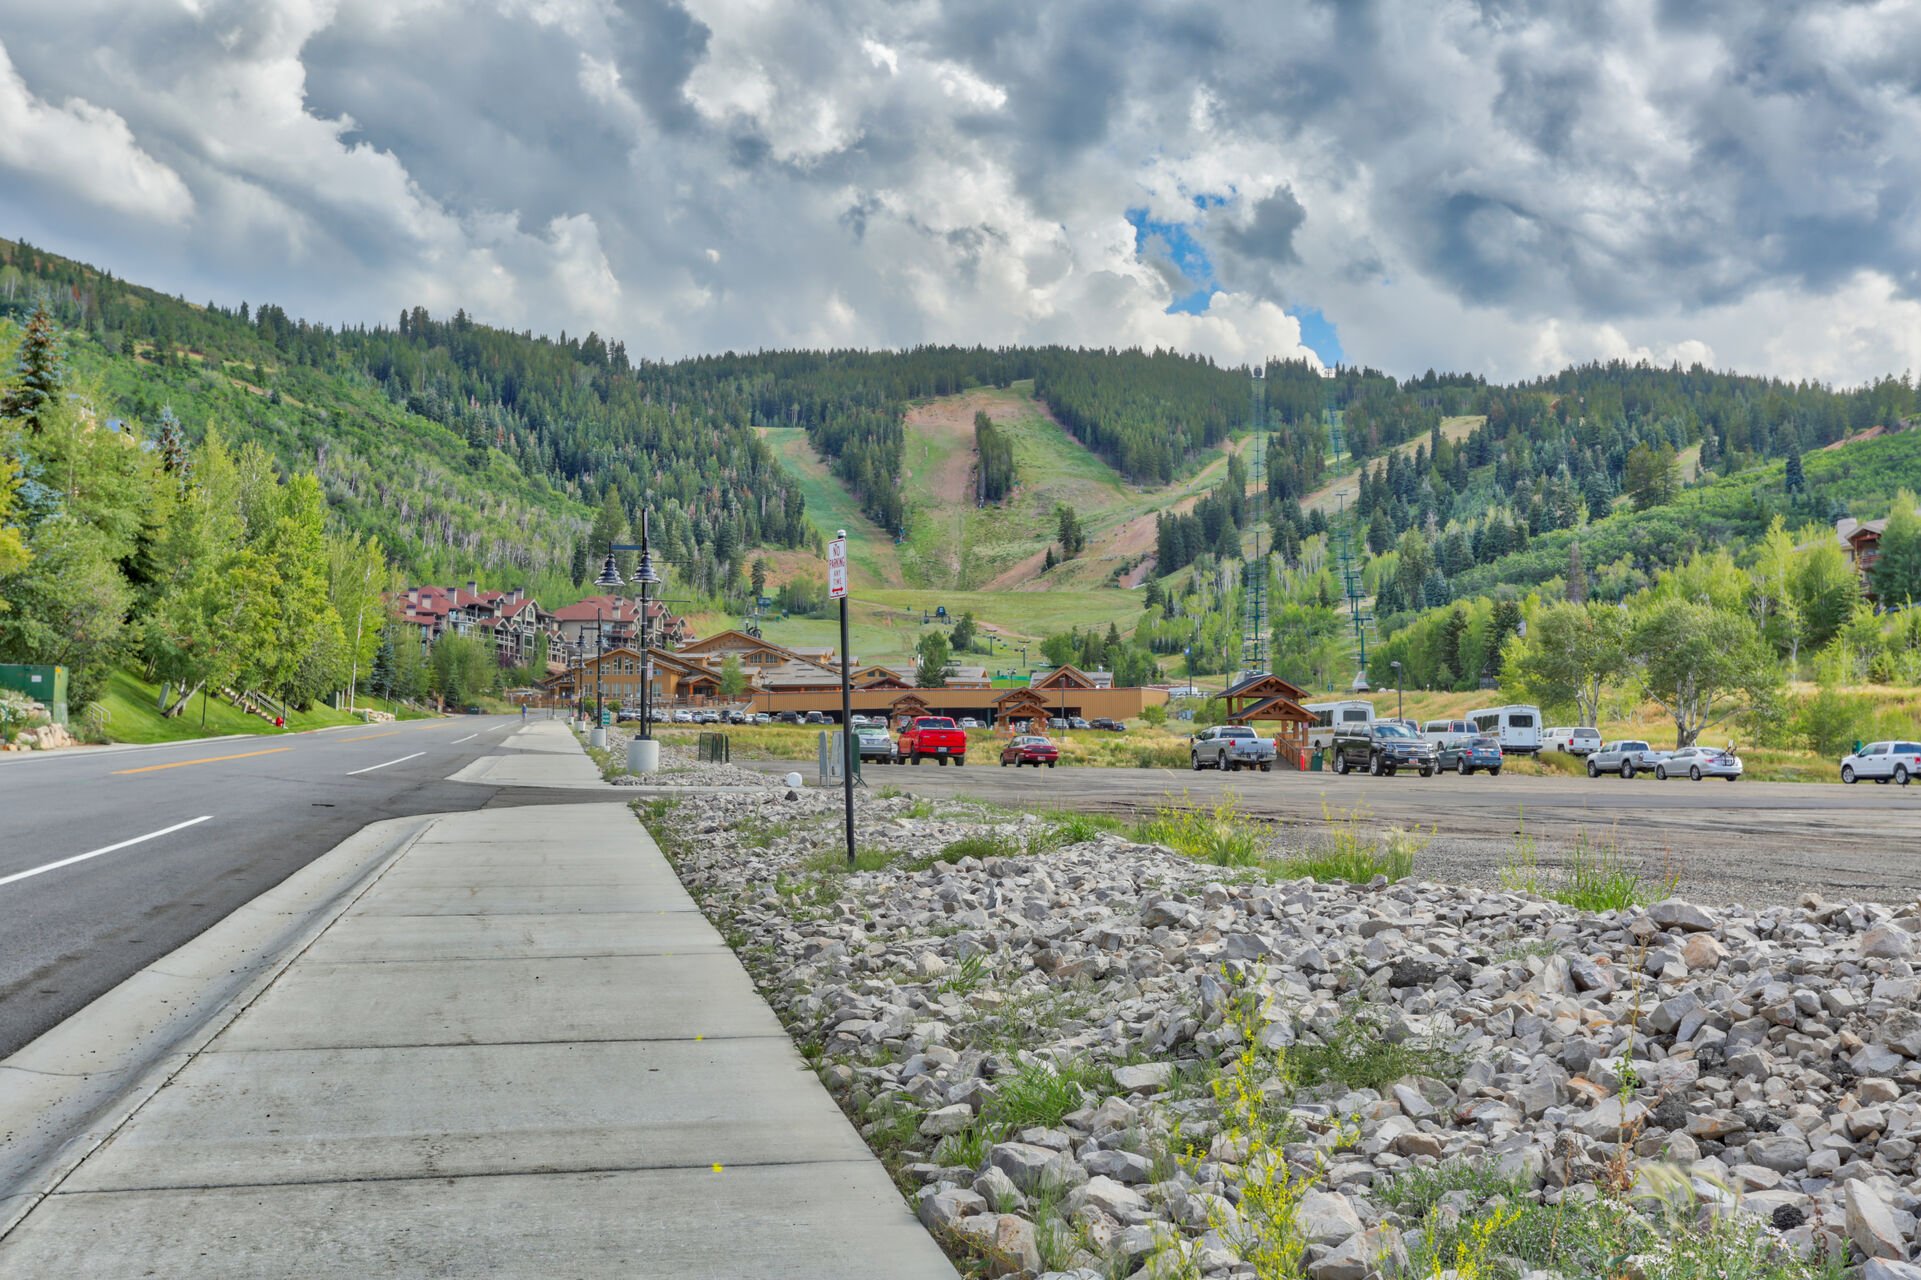 Short Walk to Deer Valley Resort Snow Park Lodge, Chair Lifts and Ski Runs, Amphitheater for Summer Concerts and St. Regis